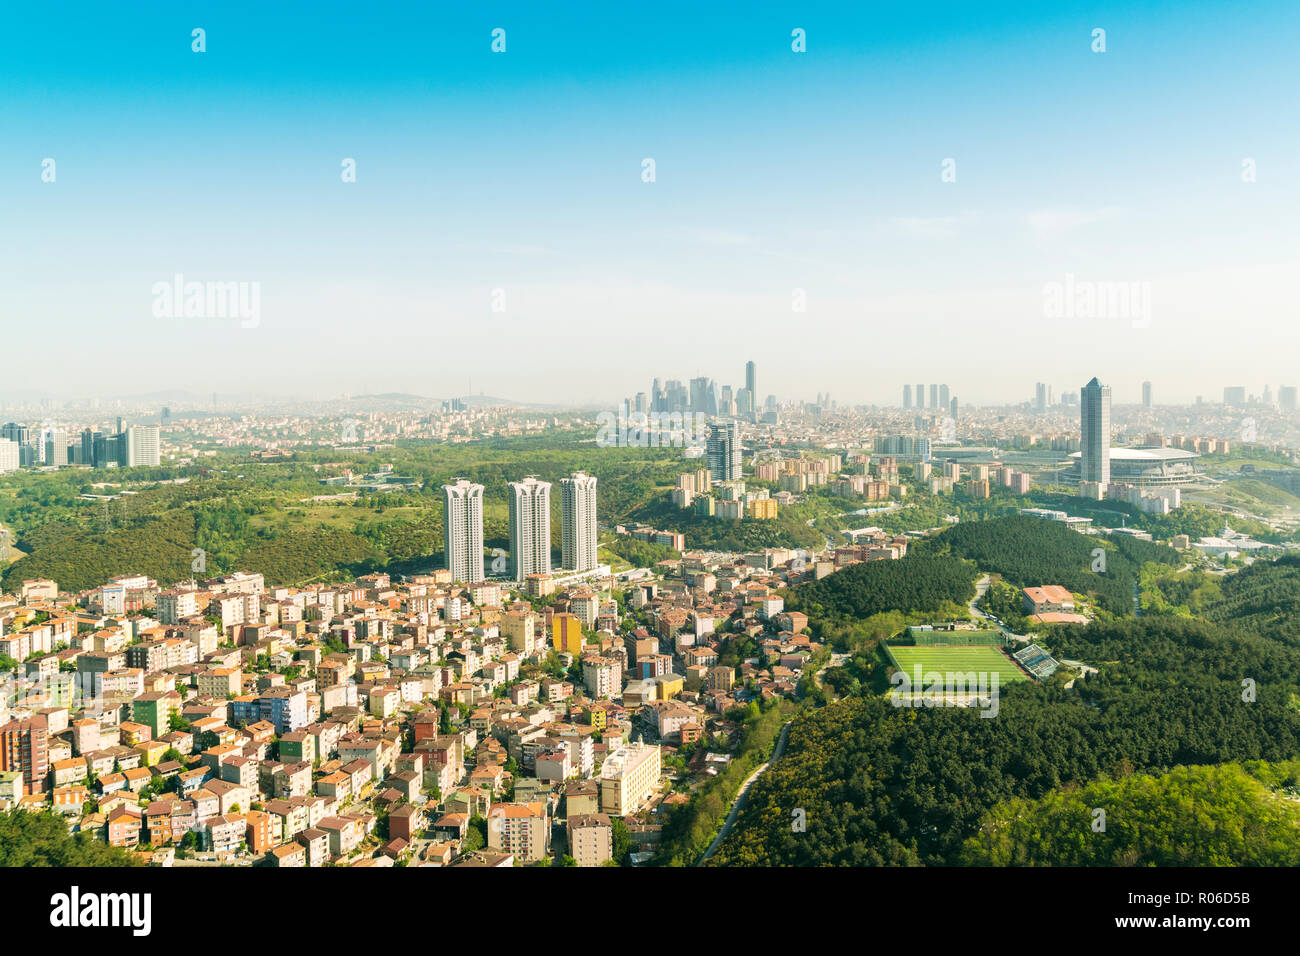 Aerial view of the modern part of Istanbul with skyscrapers in the background, Istanbul, Turkey, Europe Stock Photo